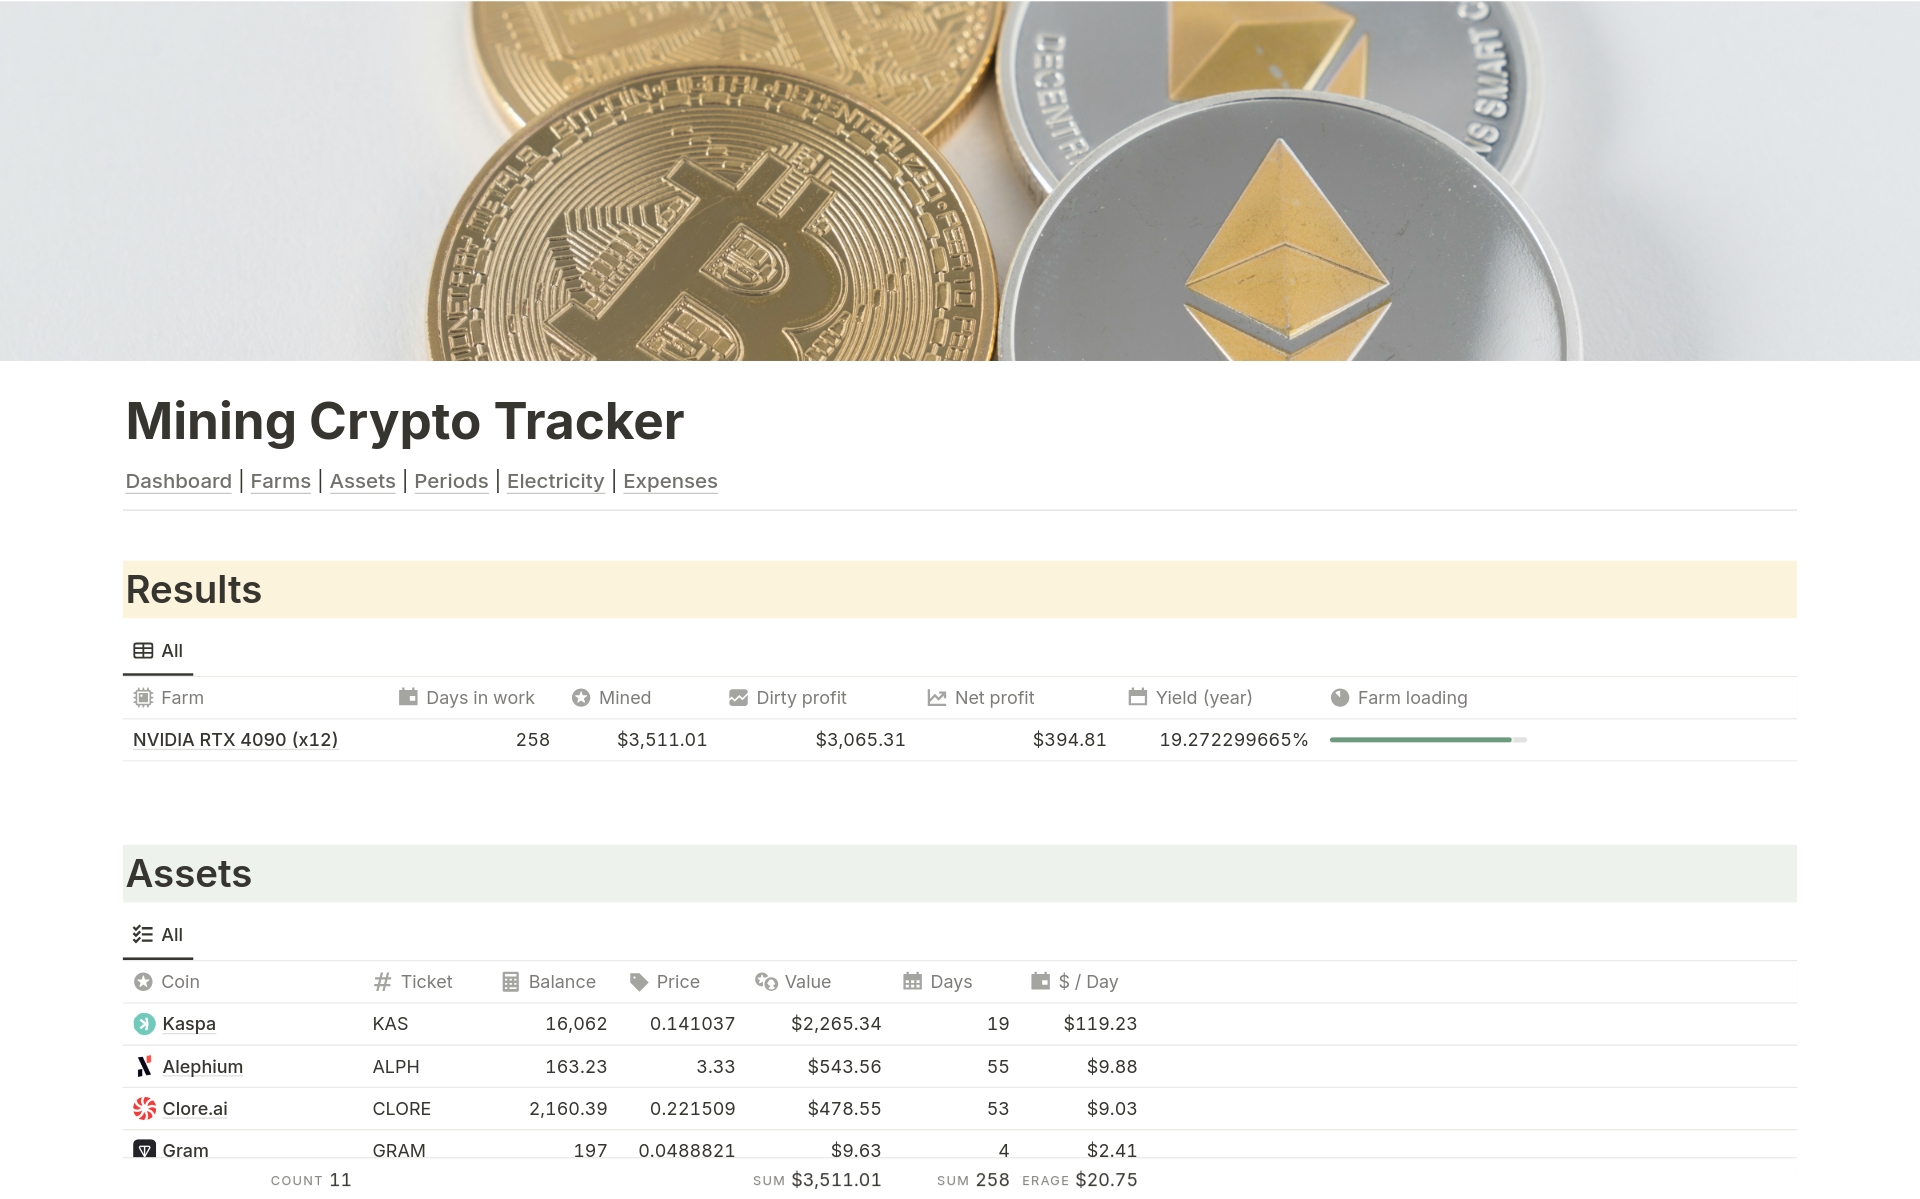 A complete tracker for recording cryptocurrency mining results and all expenses
Accounting for all cryptocurrencies (coins)
Accounting for all mining farms
Farm operation periods
Electricity metering
Other expenses